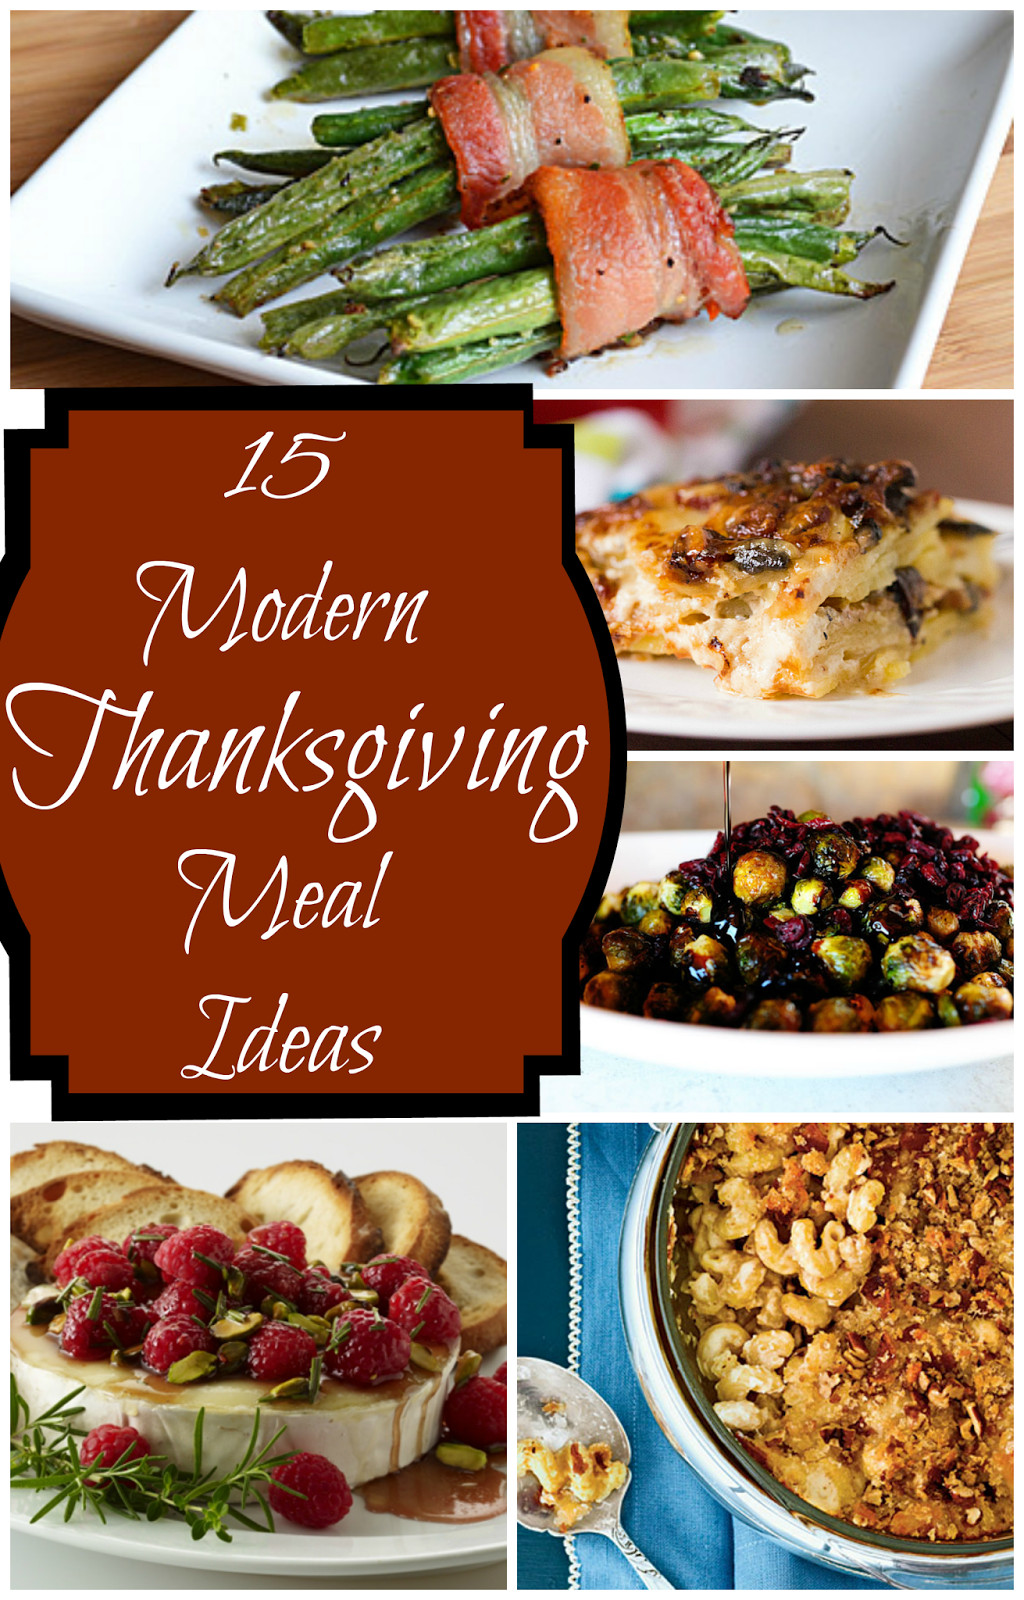 Mother'S Day Dinner Ideas Pinterest
 Not Your Mother s Recipes 15 Modern Thanksgiving Meal